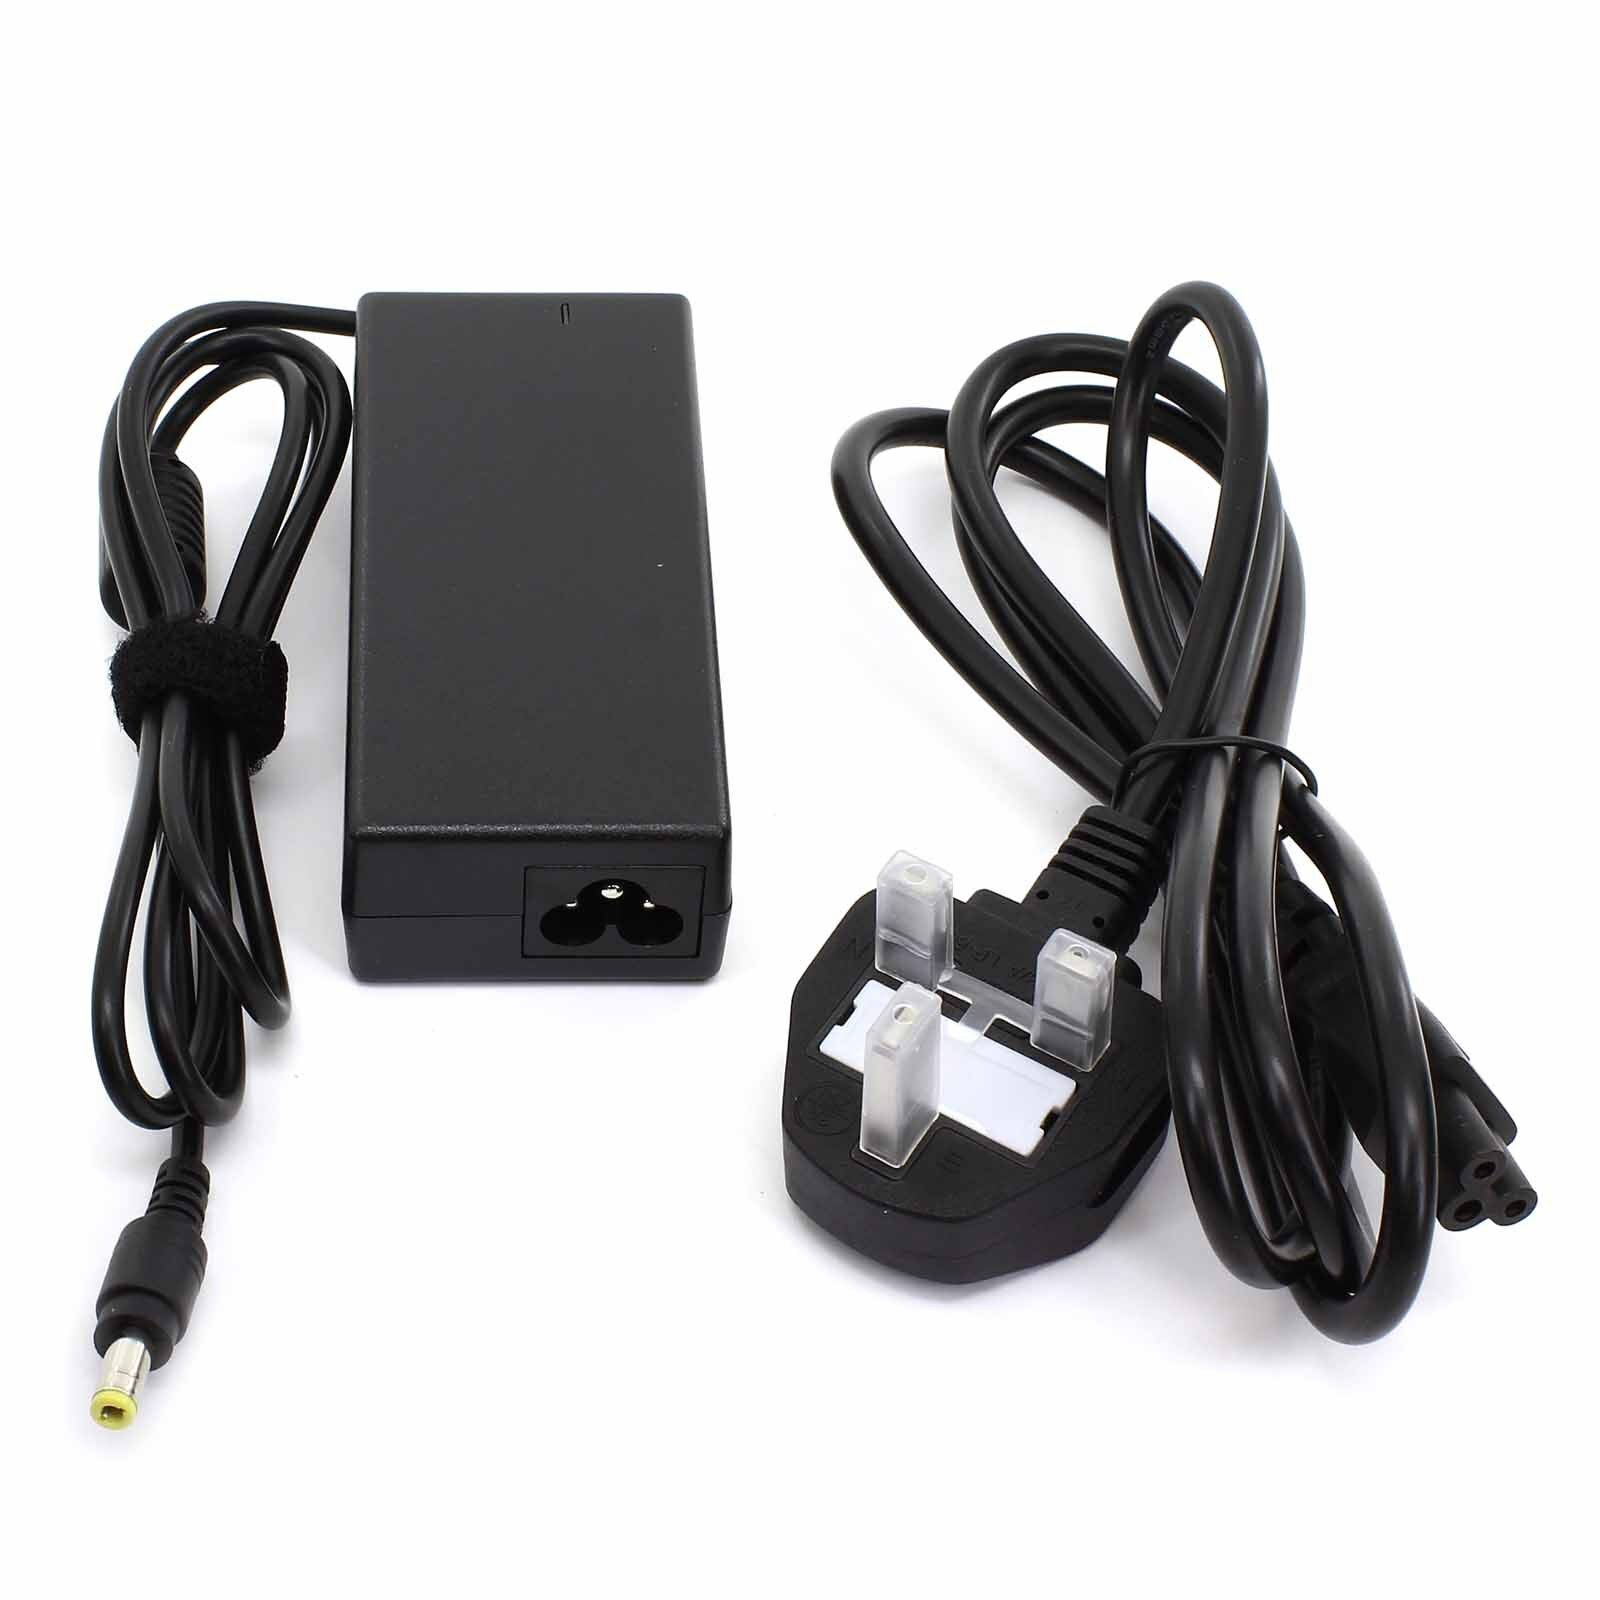 APD DA-34A02 AC Adapter For Asian Power Devices 5Vdc 2A 12Vdc 2A Power Supply Cord Technical Spe